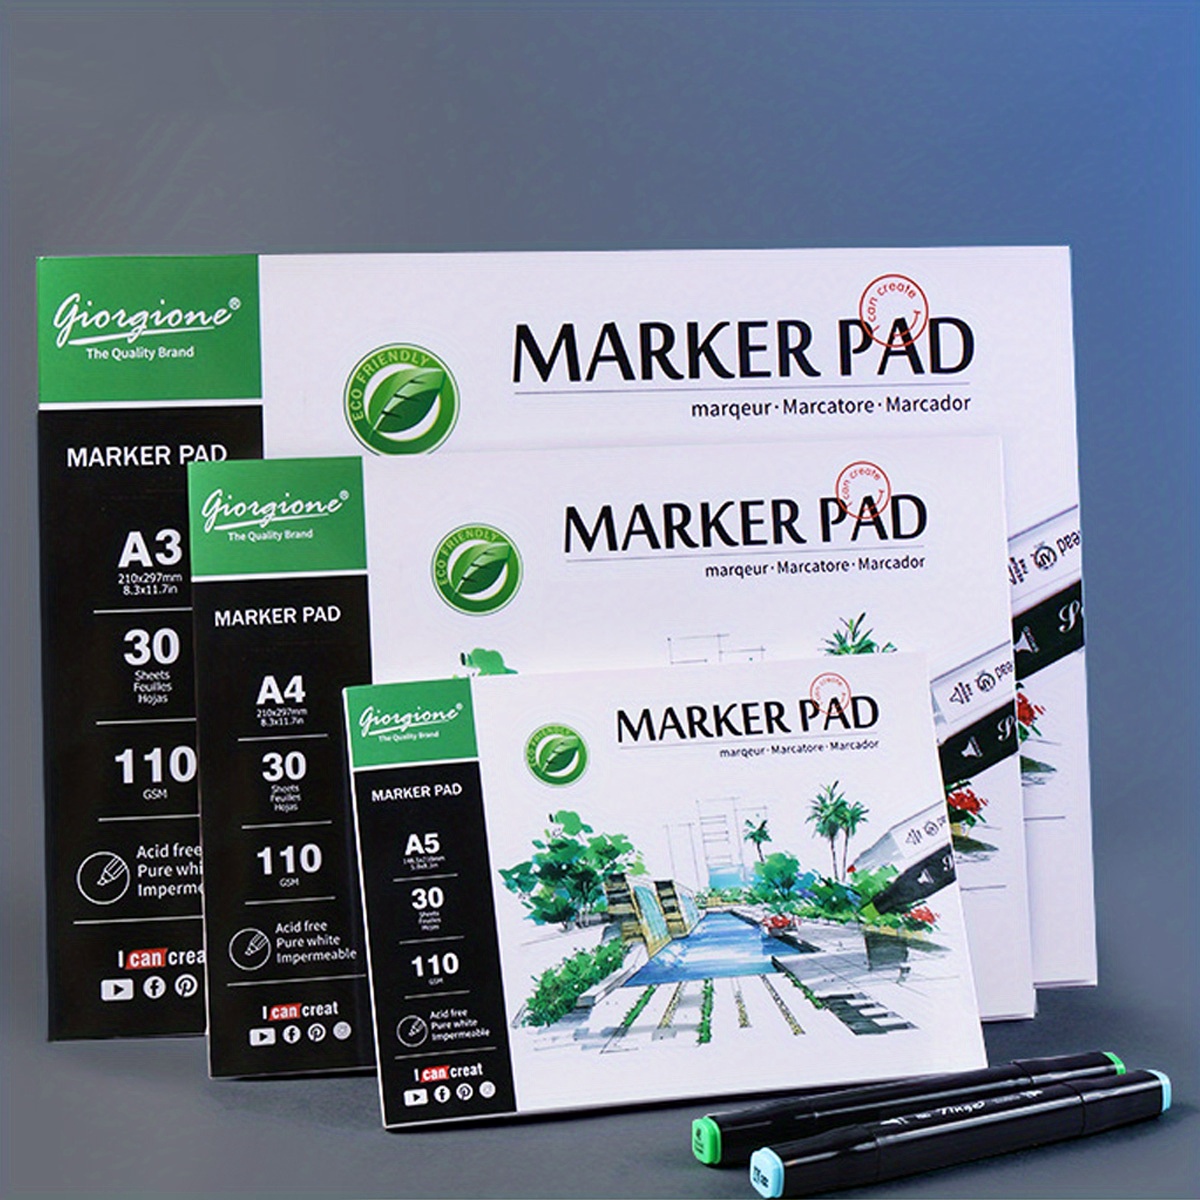 50 Sheet A4/a5 Proffessional Marker Paper Sketch Painting Marker